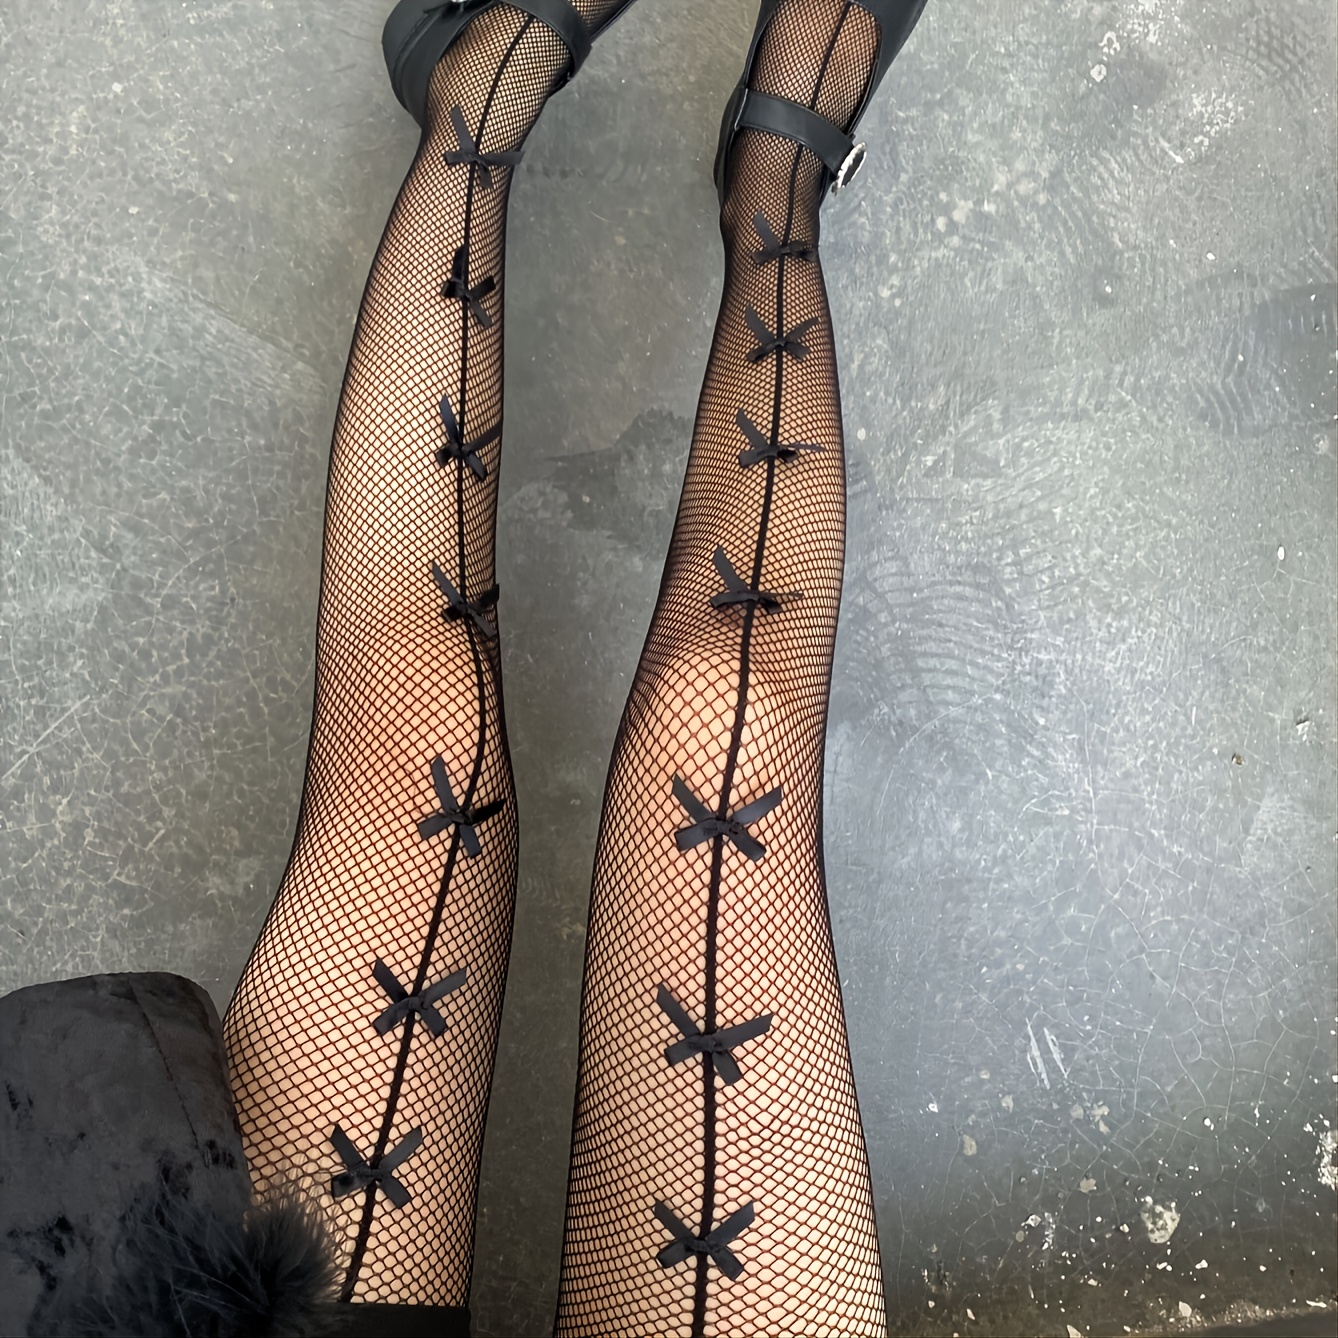 1 Pair Of Butterfly Net Tights, Sexy And Cute Tights, Women's Stockings &  Hosiery